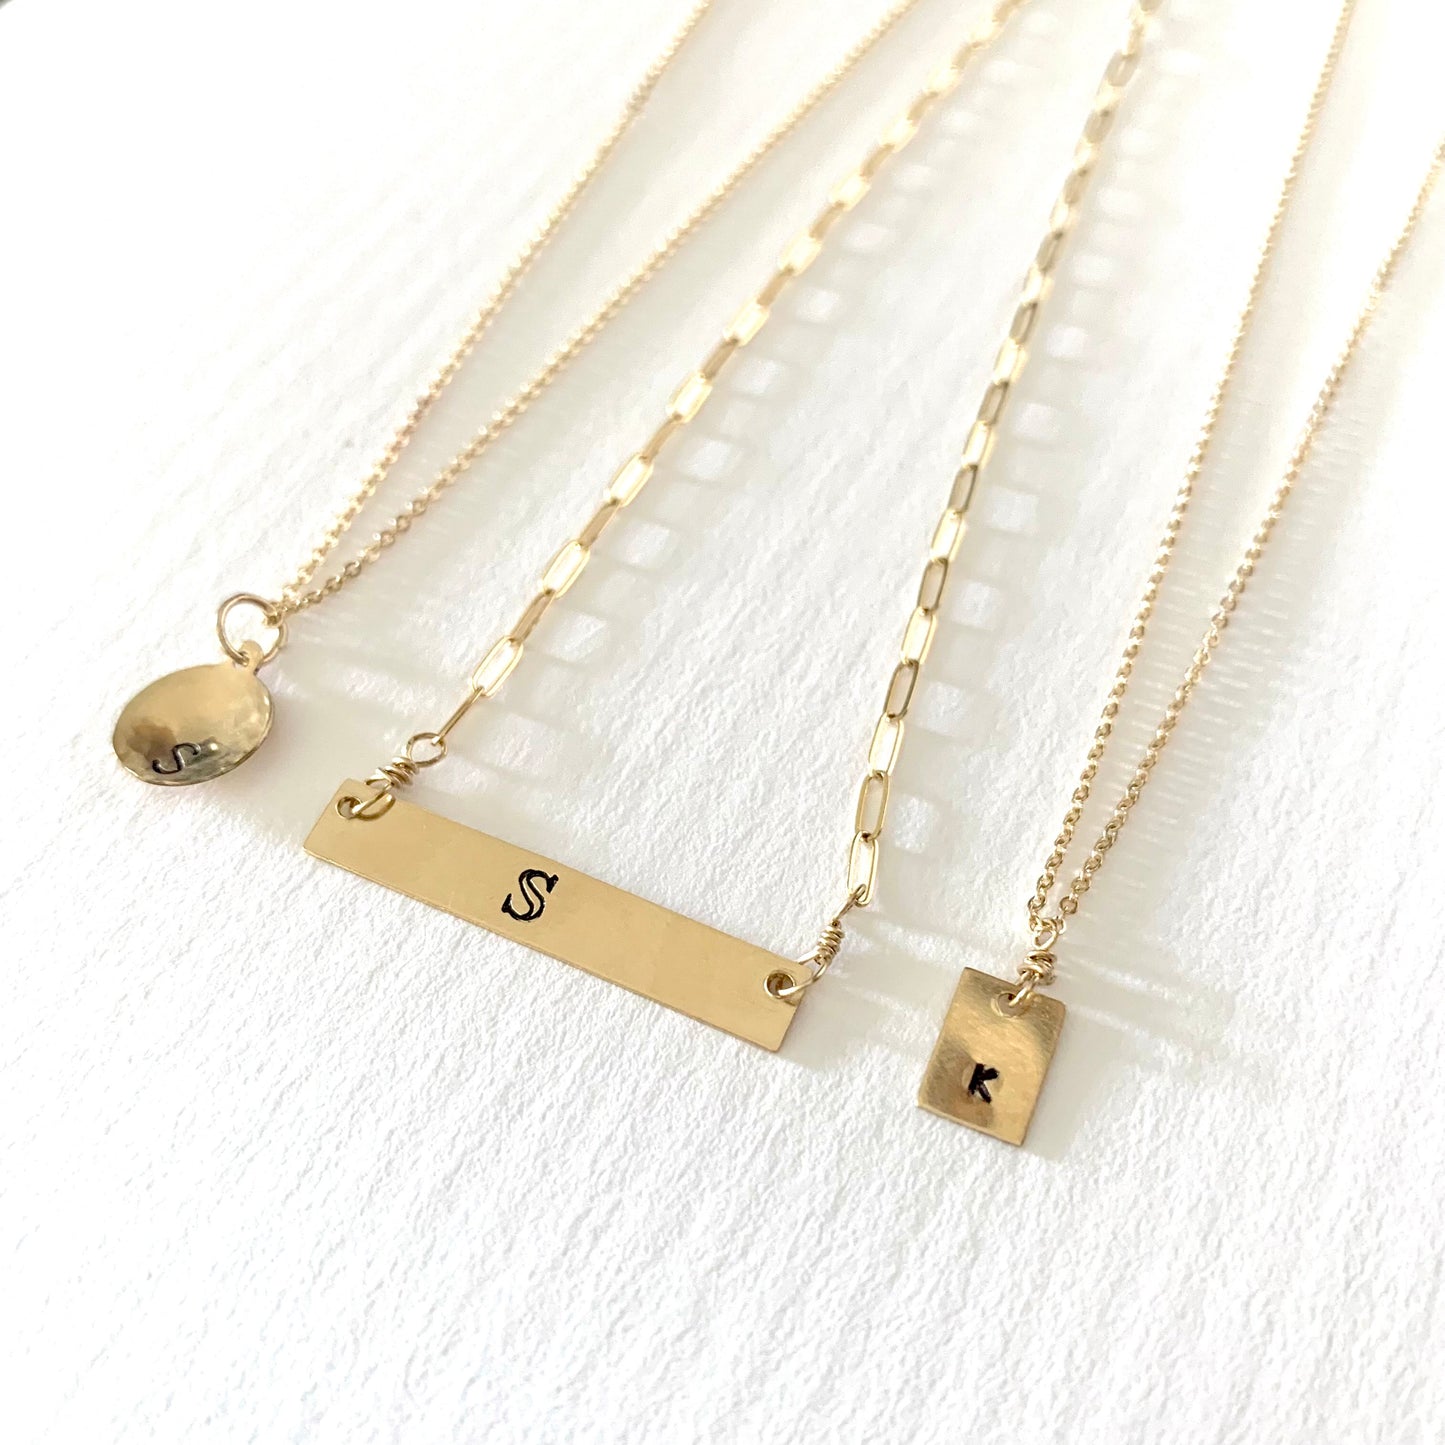 Initial bar necklace